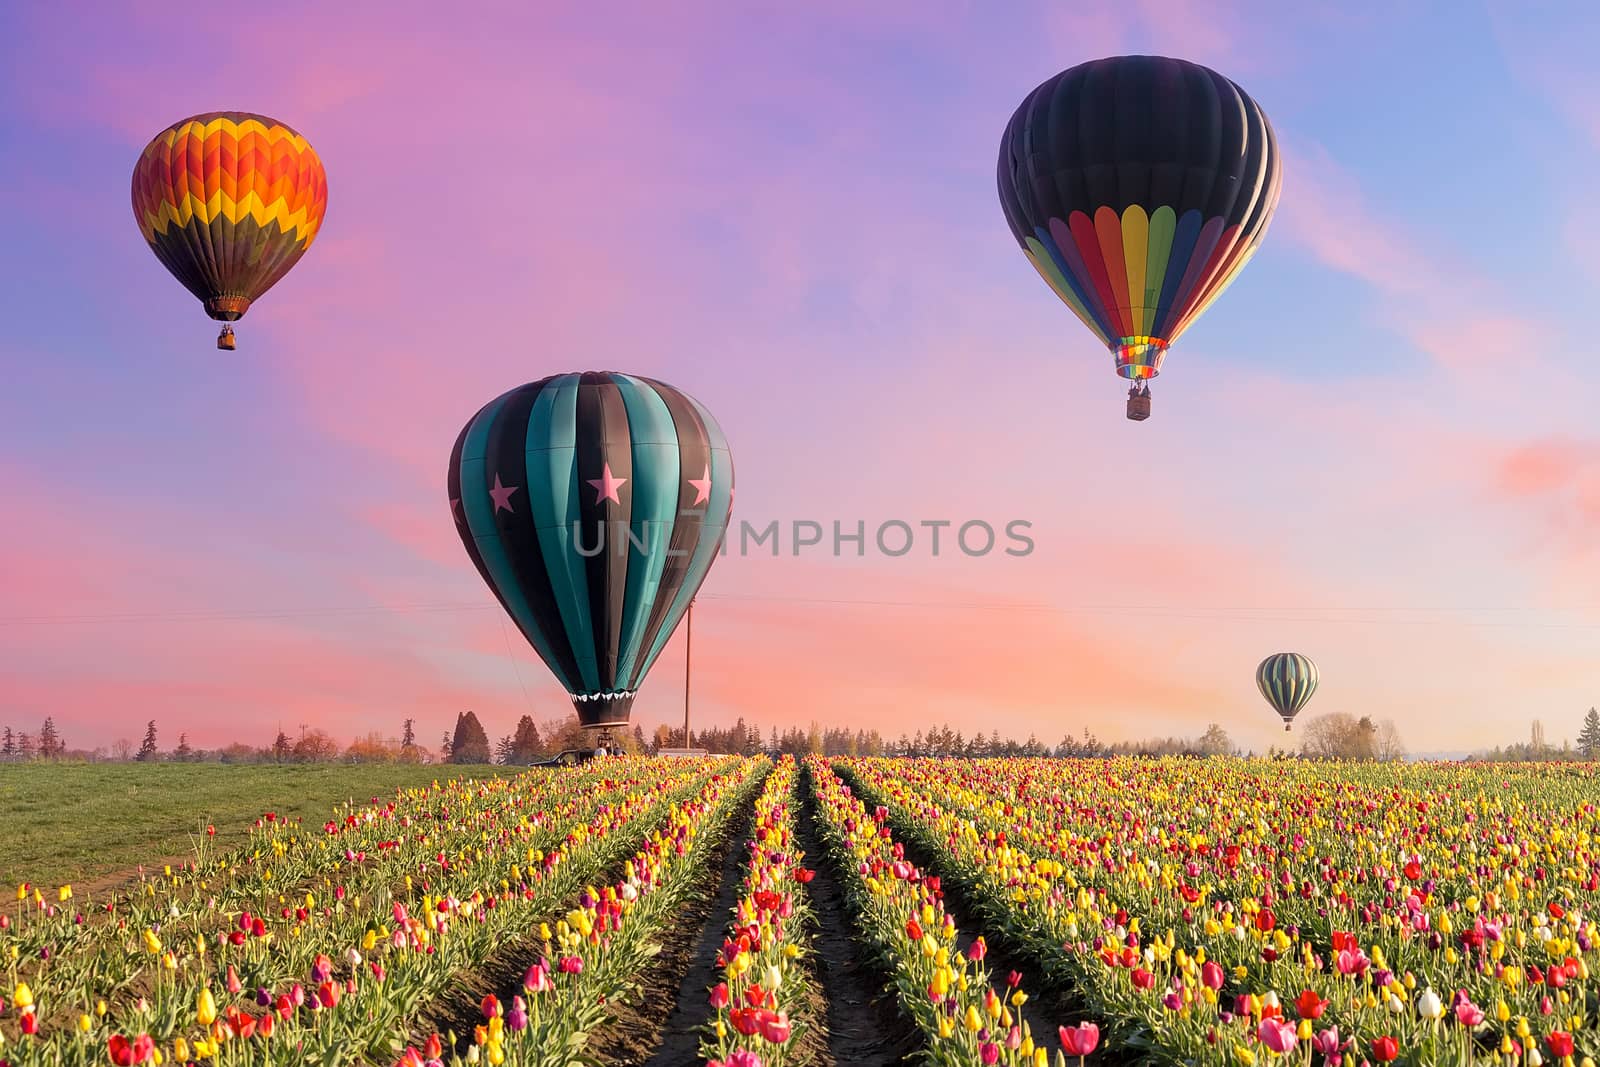 Hot Air Balloons at Tulip Fields by Davidgn